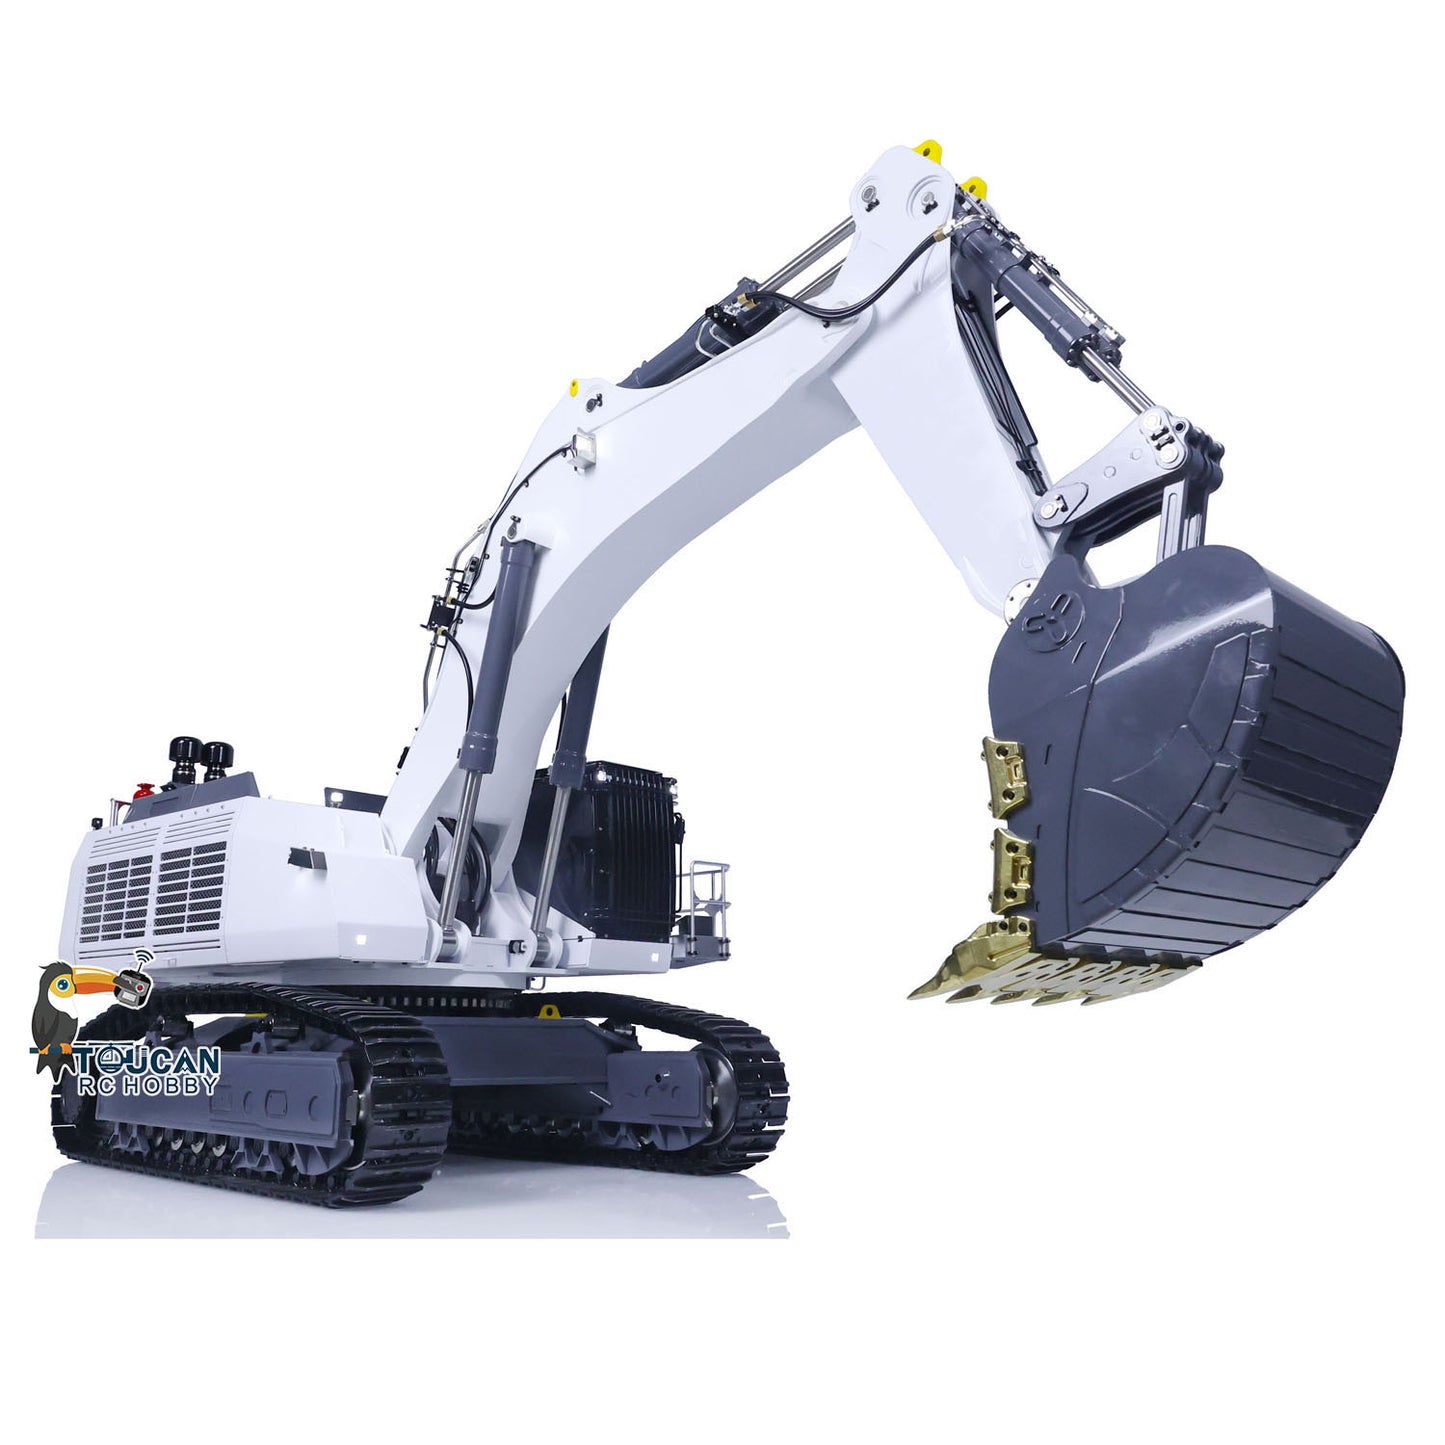 LESU 1/14 9150 Metal RC Hydraulic Excavator RTR Remote Control Digger Painted Contrcution Vehicle Hobby Model ESC